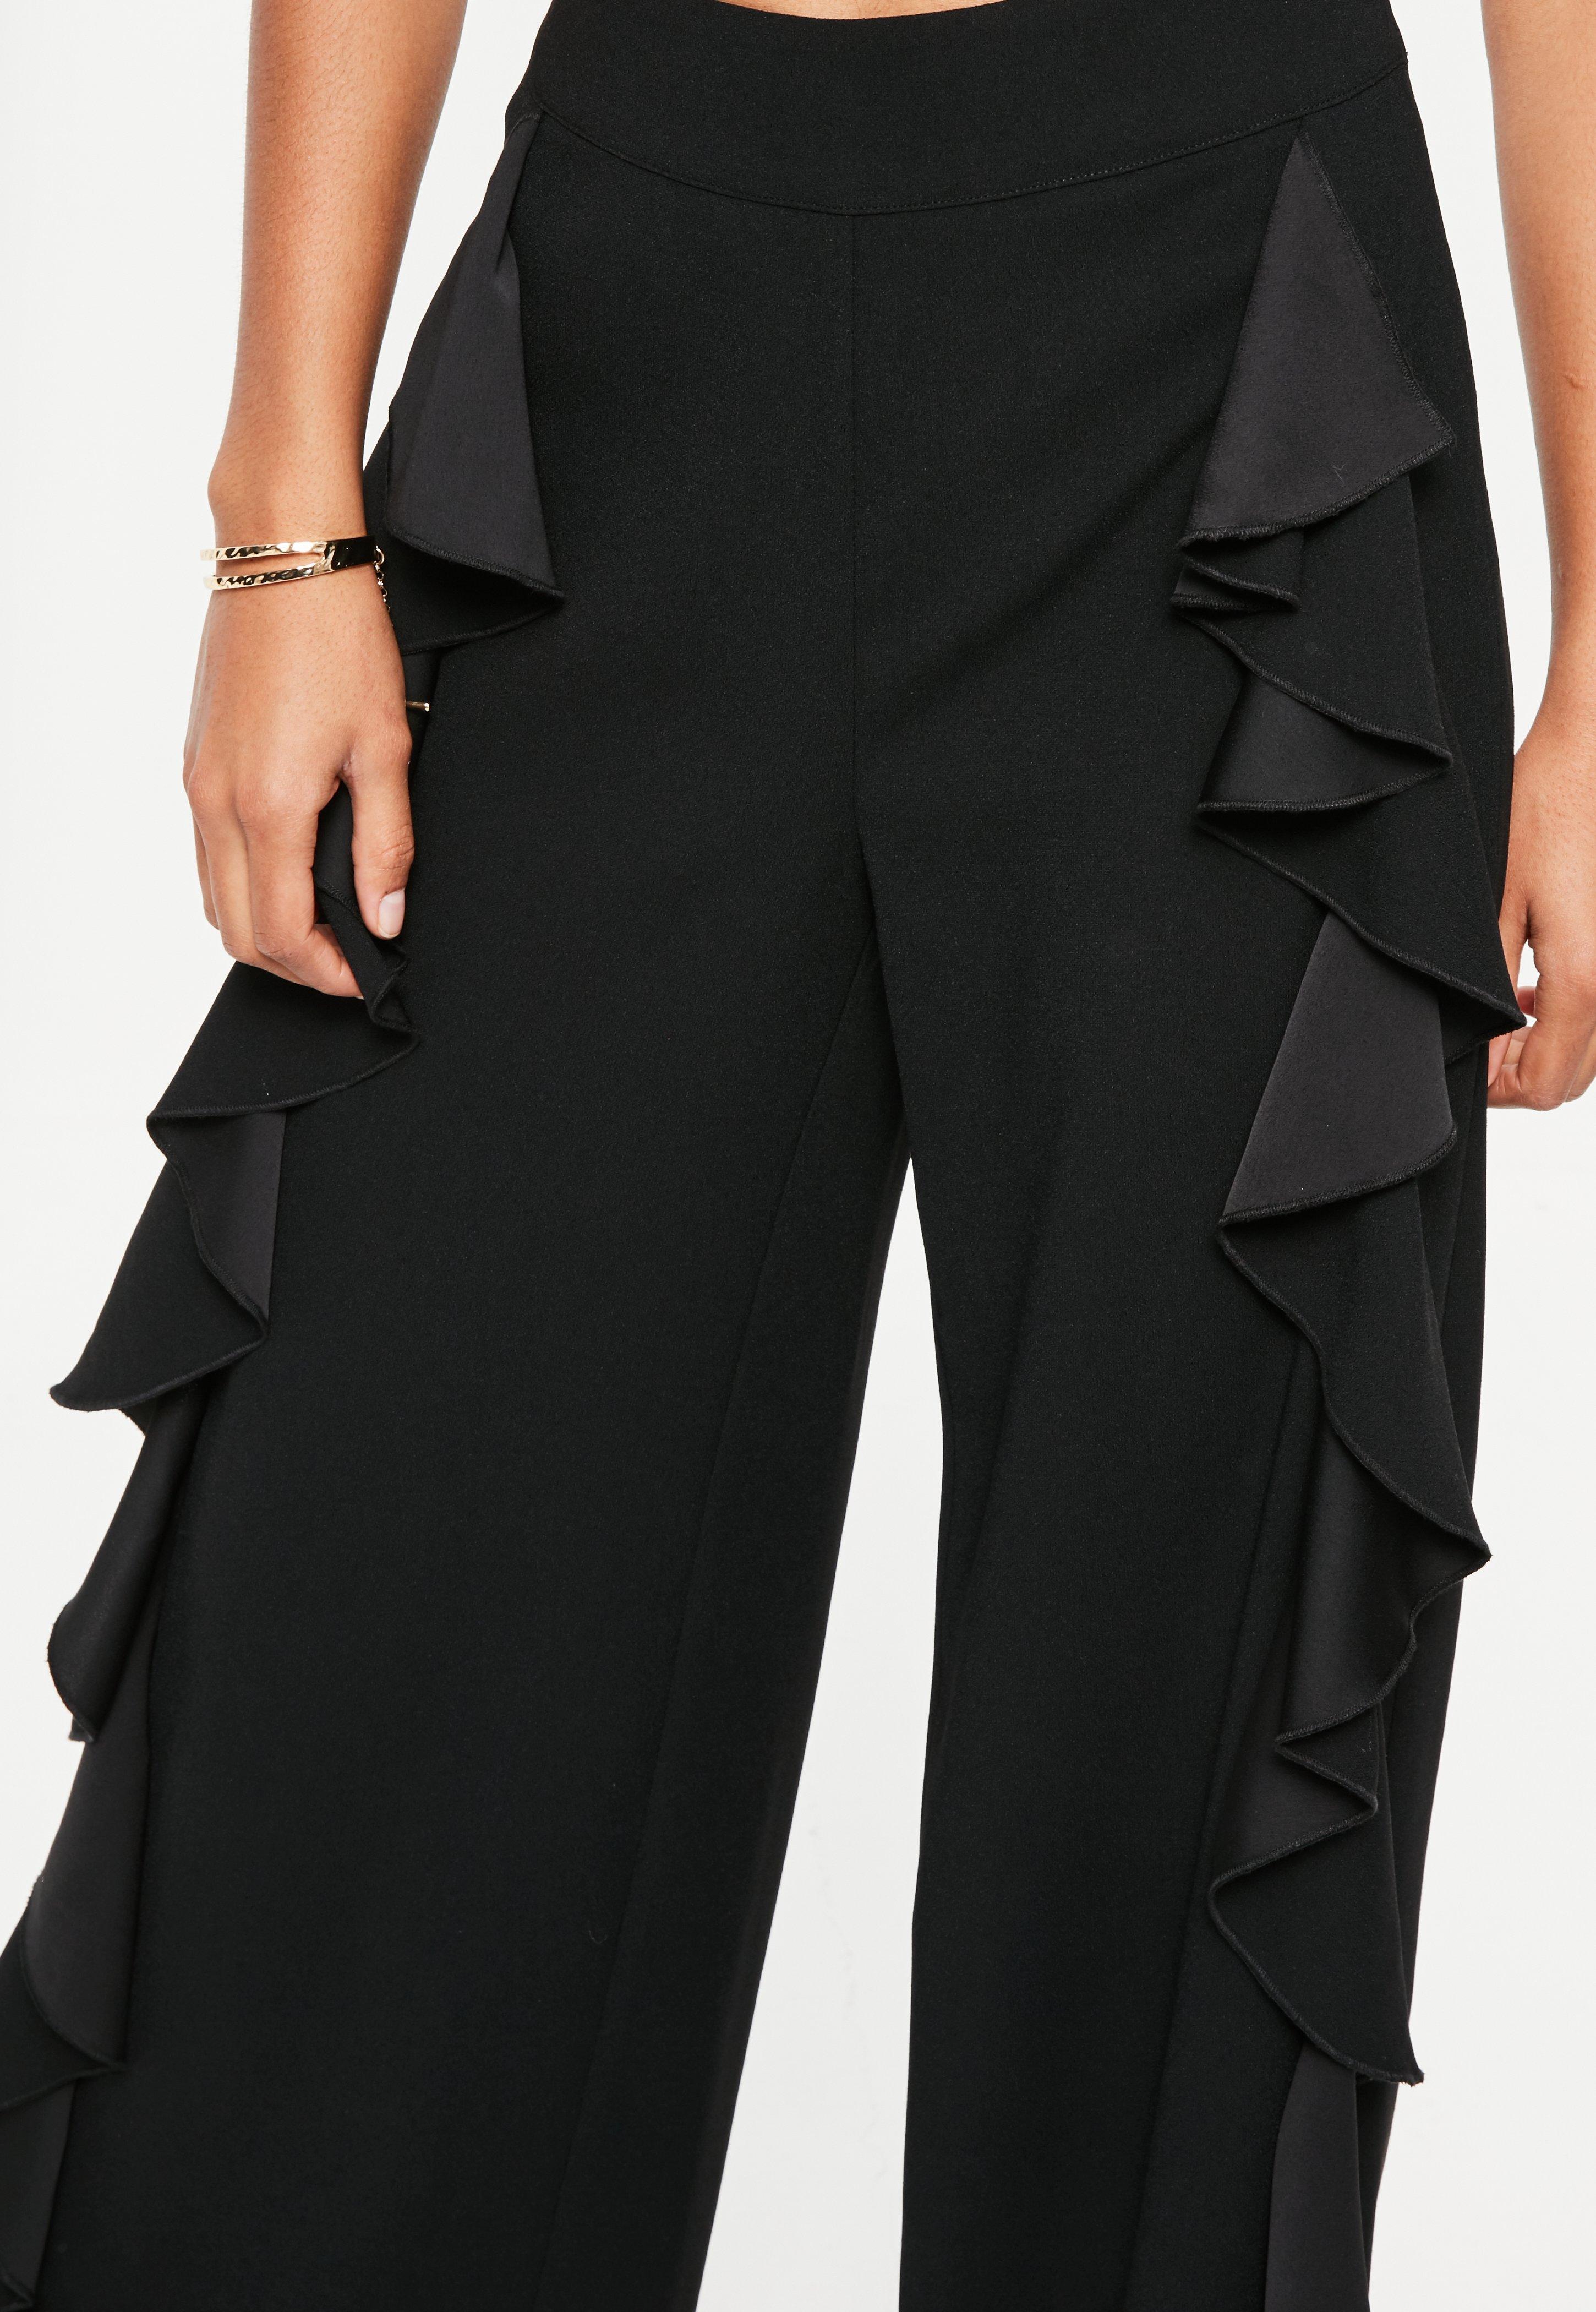 Lyst - Missguided Black Frill Side Wide Leg Trousers in Black